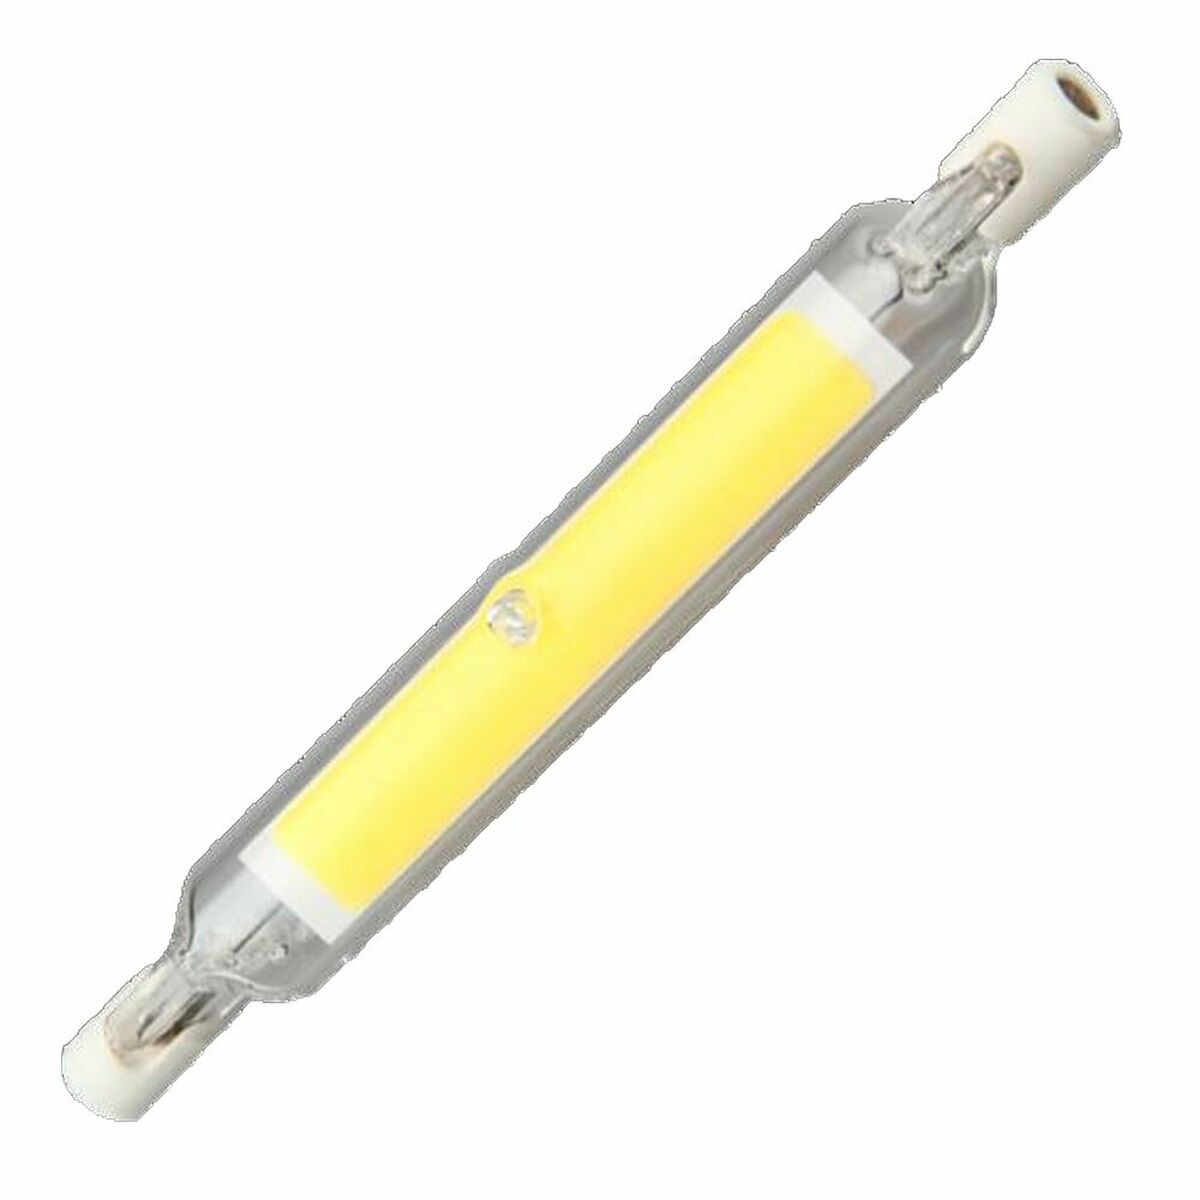 LED lamp Silver Electronics ECO 4W R7s